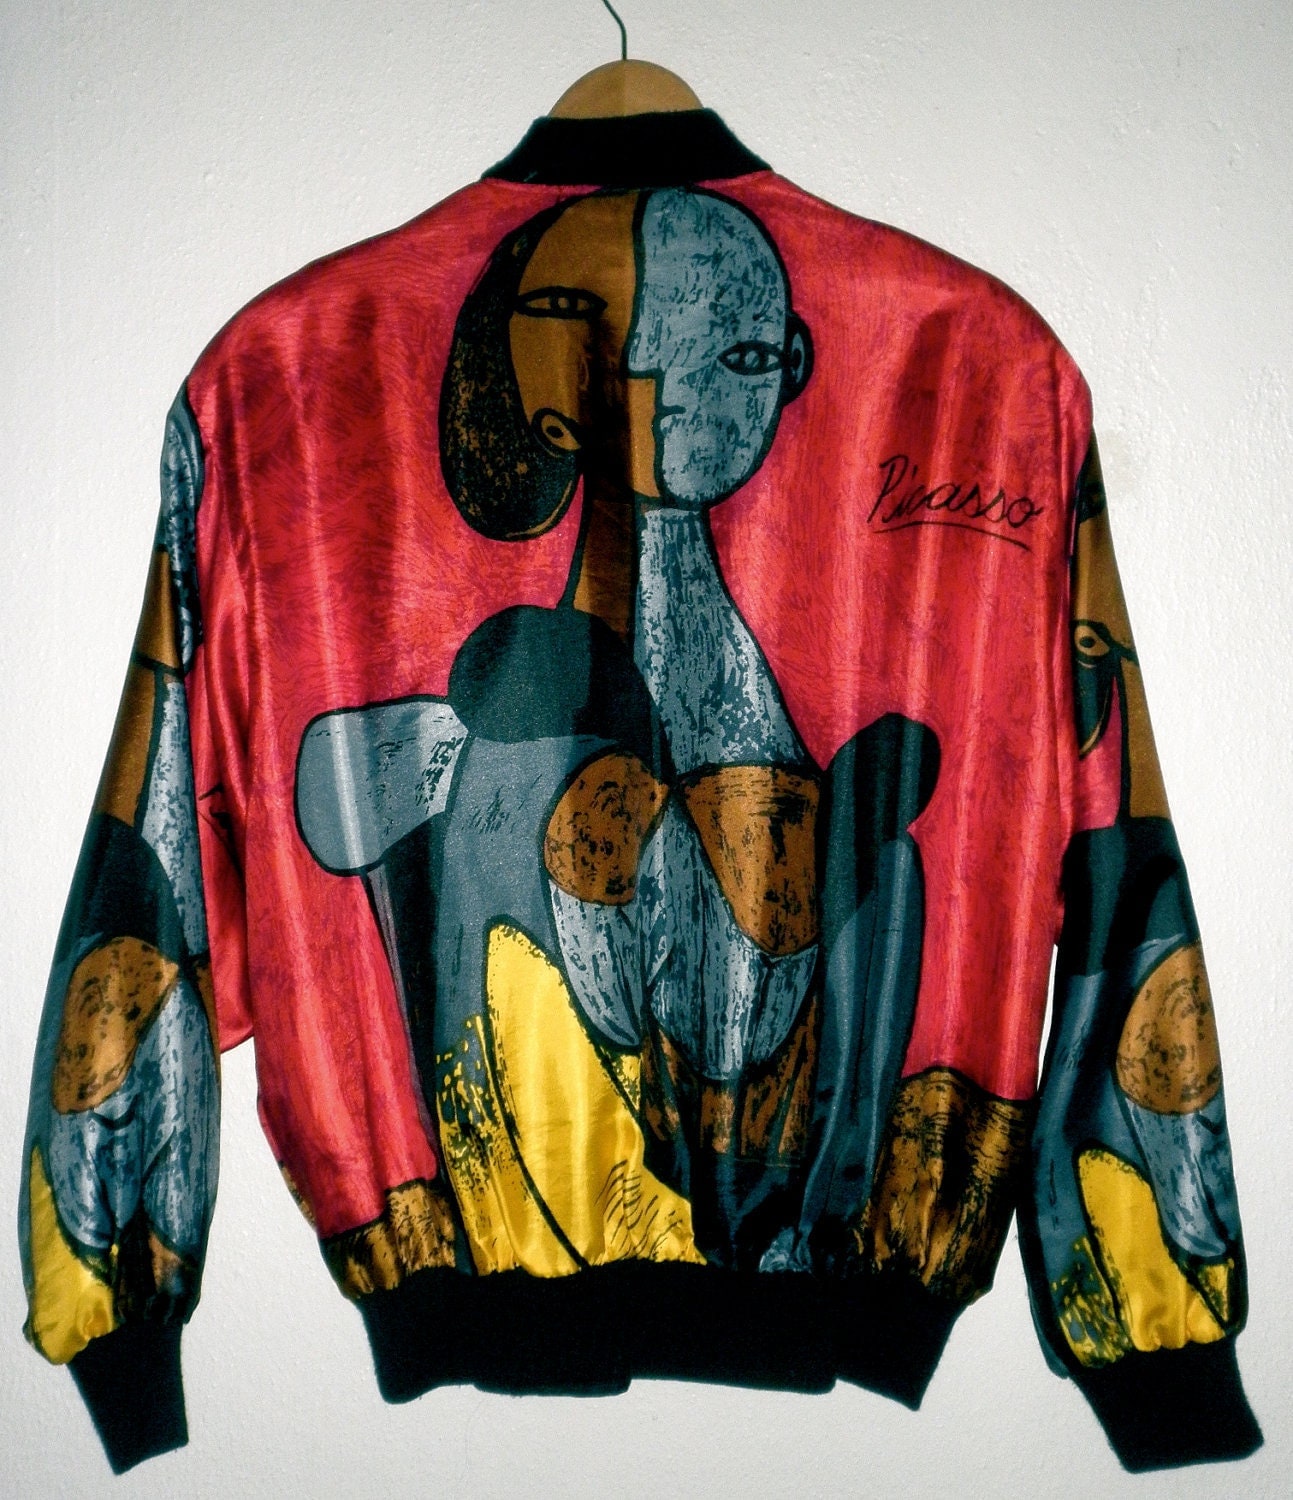 Reversible Picasso Jacket A Piece of Wearable Art